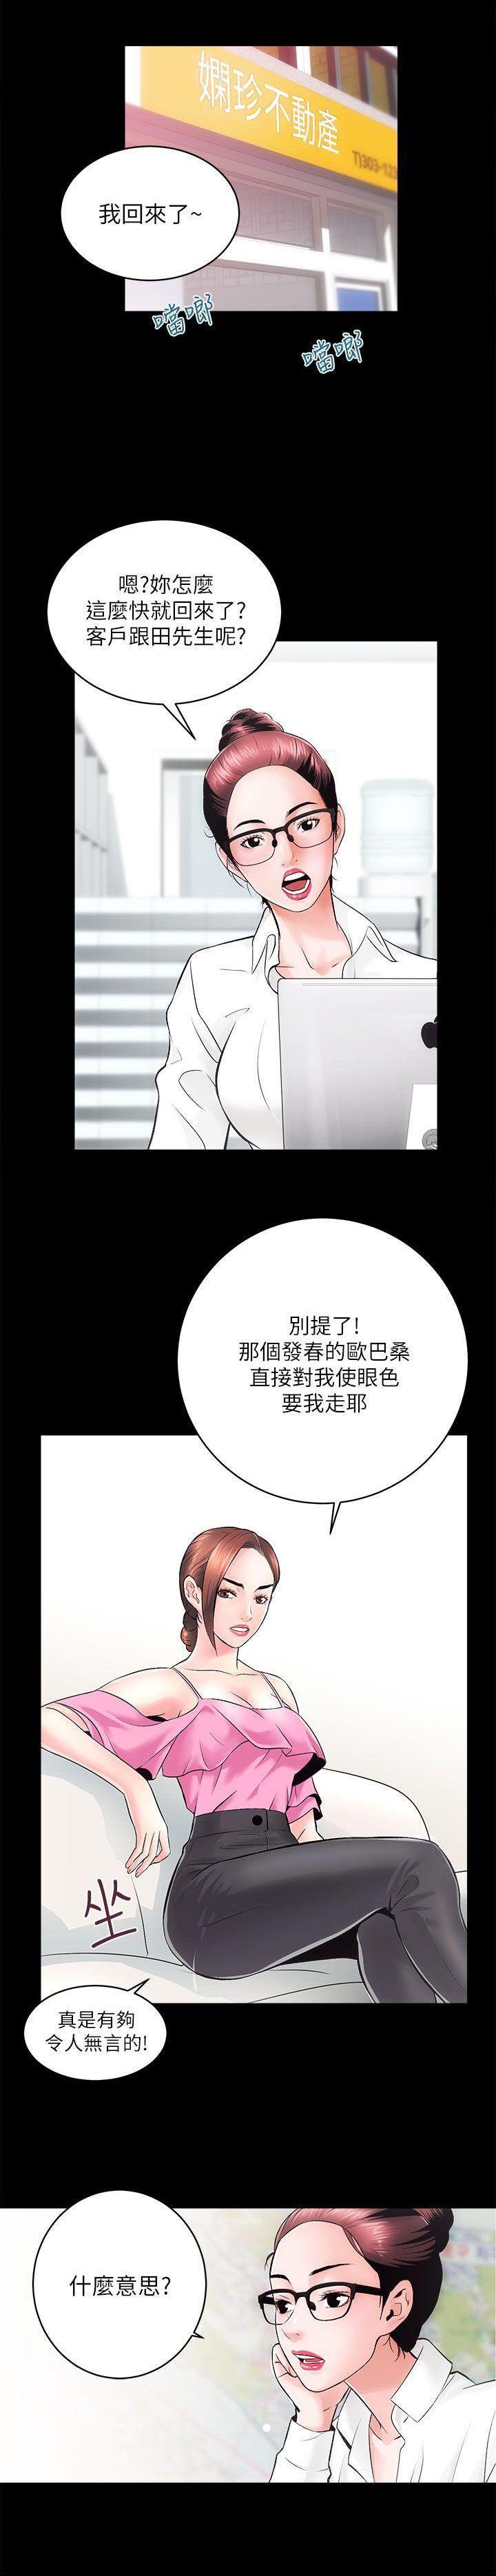 Hot 性溢房屋 Chapter 5-8 Yanks Featured - Page 11